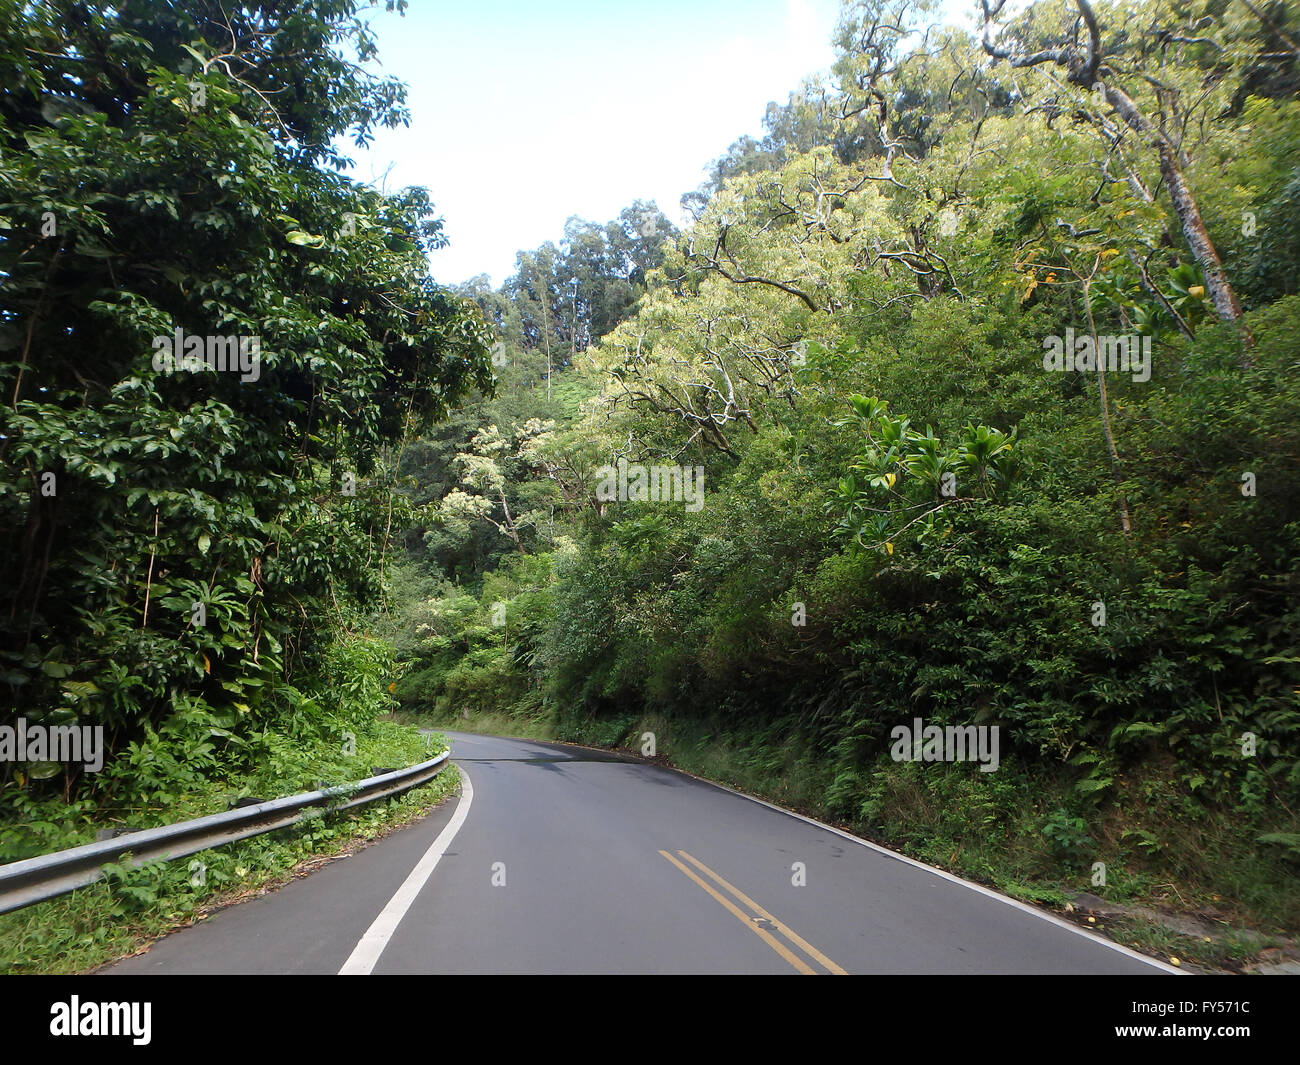 A beautiful view of road to Hana from the island of Maui Hawaii, showing its diversity of nature, lush tropical green foliage, a Stock Photo